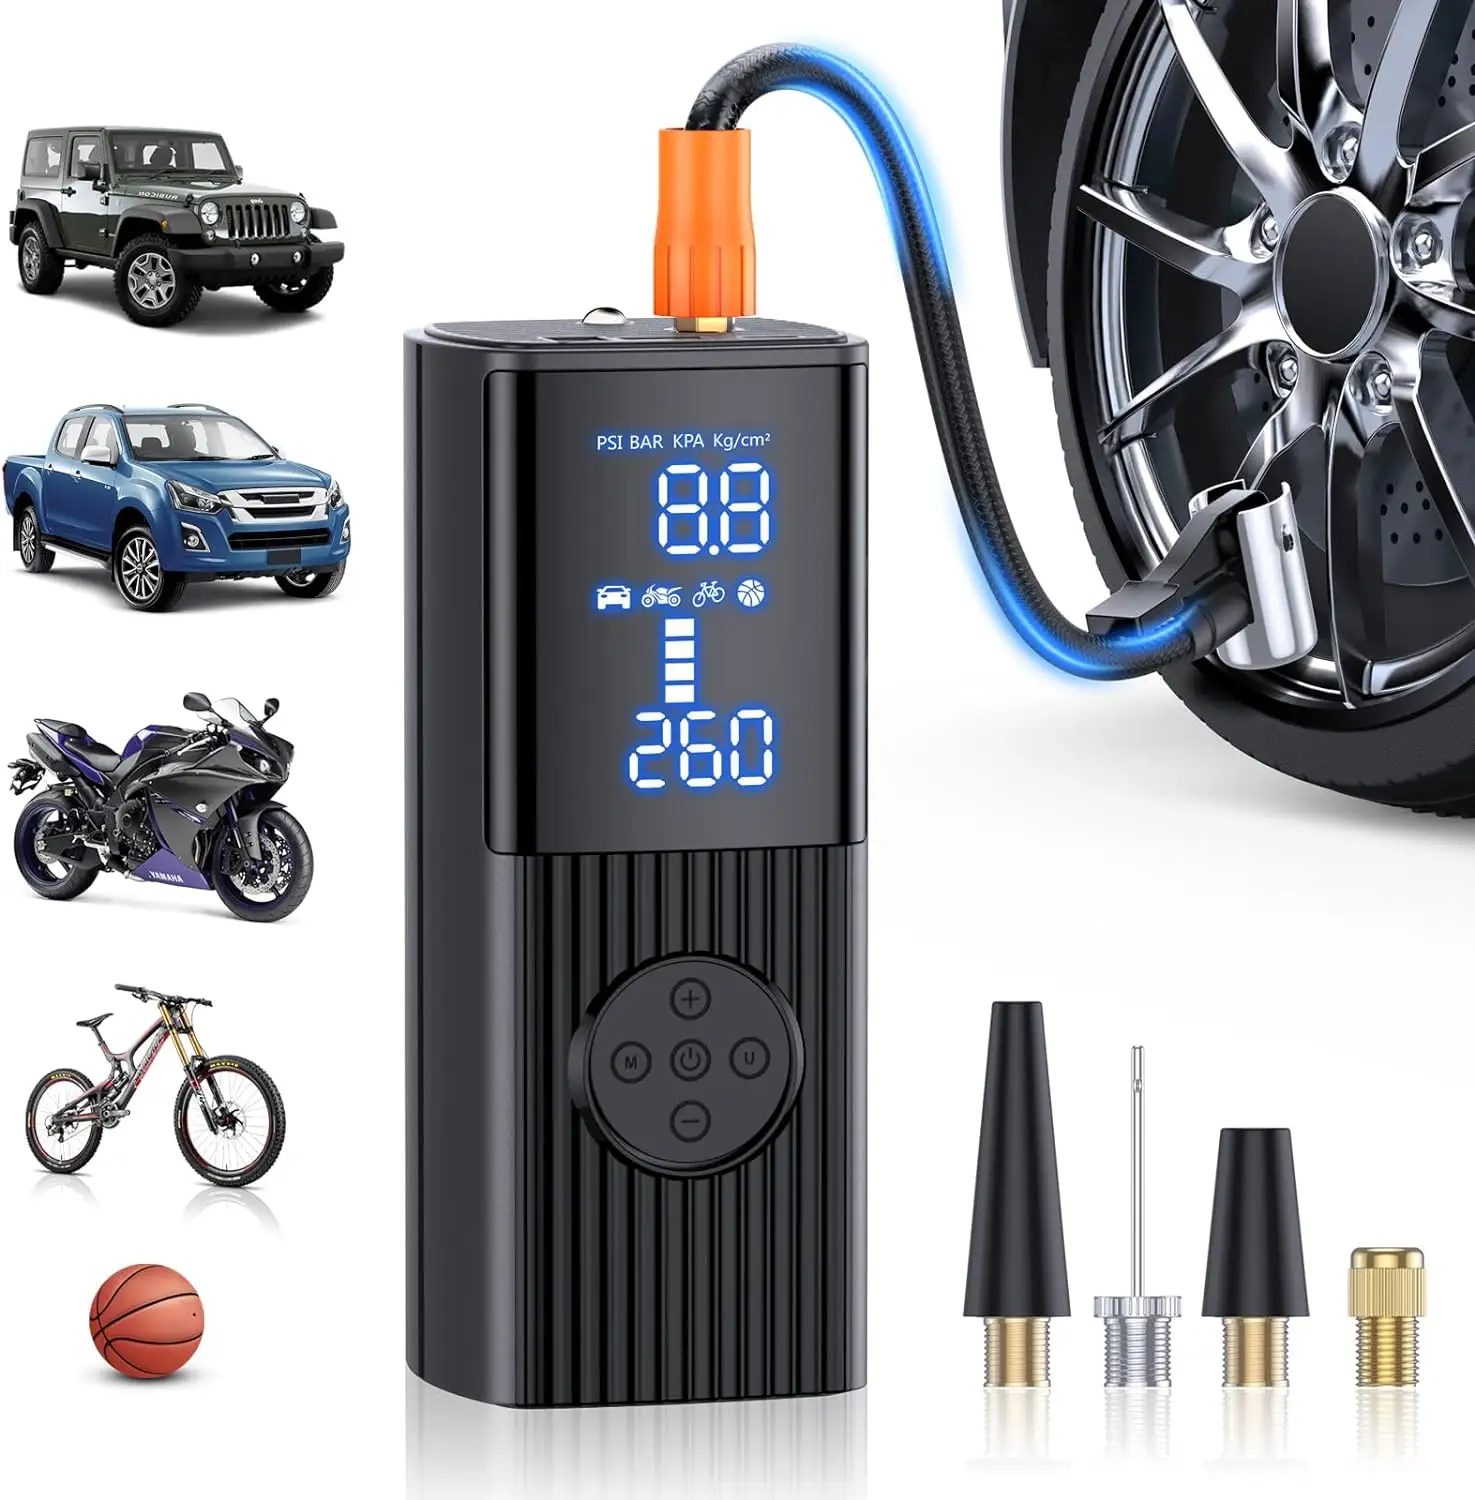 Big Double Digital Screen Display Newest Car Air Tyre Compressor Mini Pump with Battery and Cigarette Lighter Input Mini Inflat